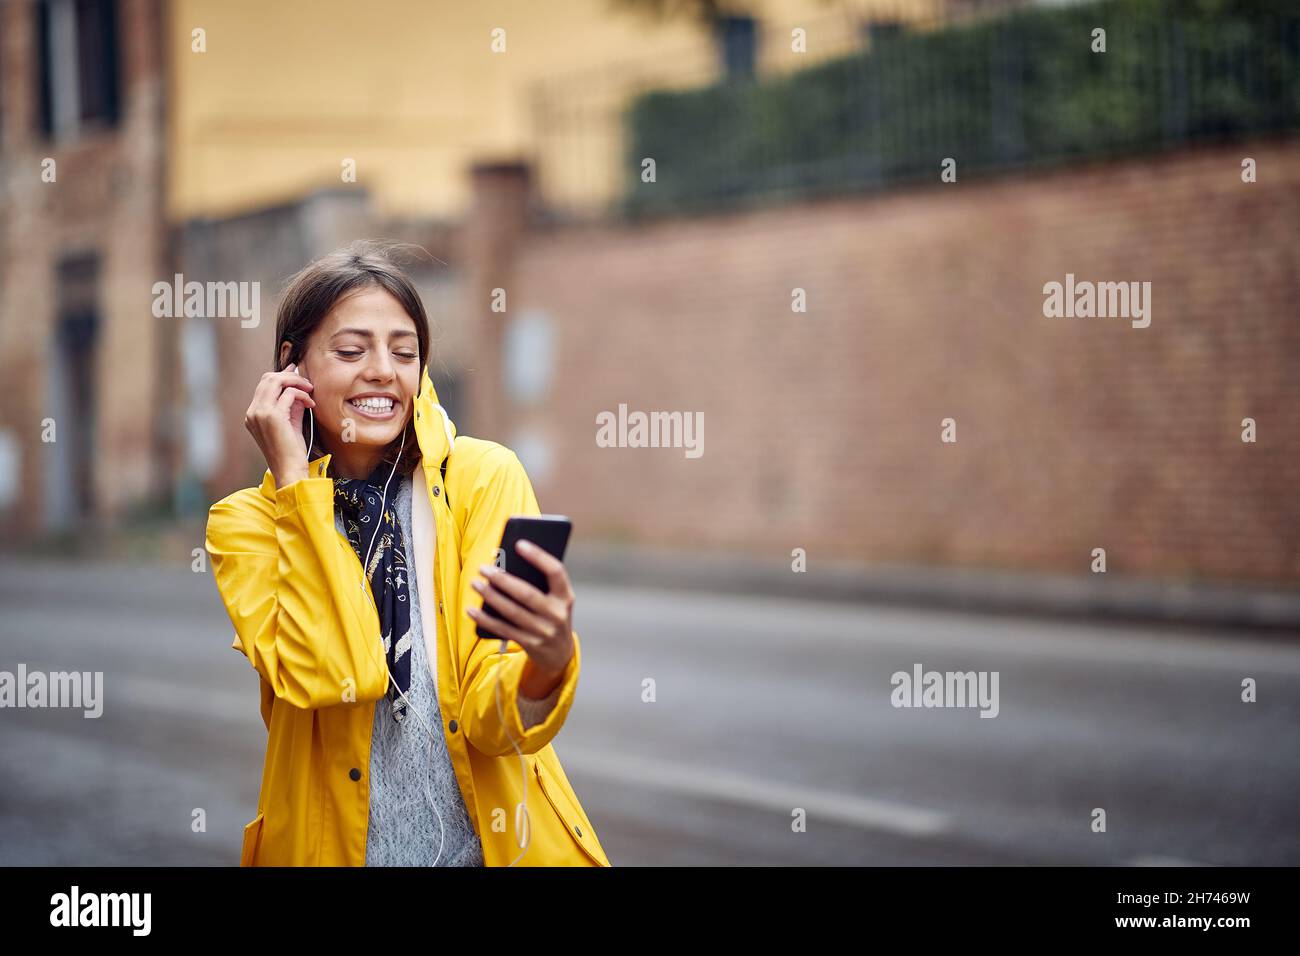 A young girl with yellow raincoat enjoying the music and a walk in a peaceful atmosphere on a cloudy day. Walk, rain, city Stock Photo